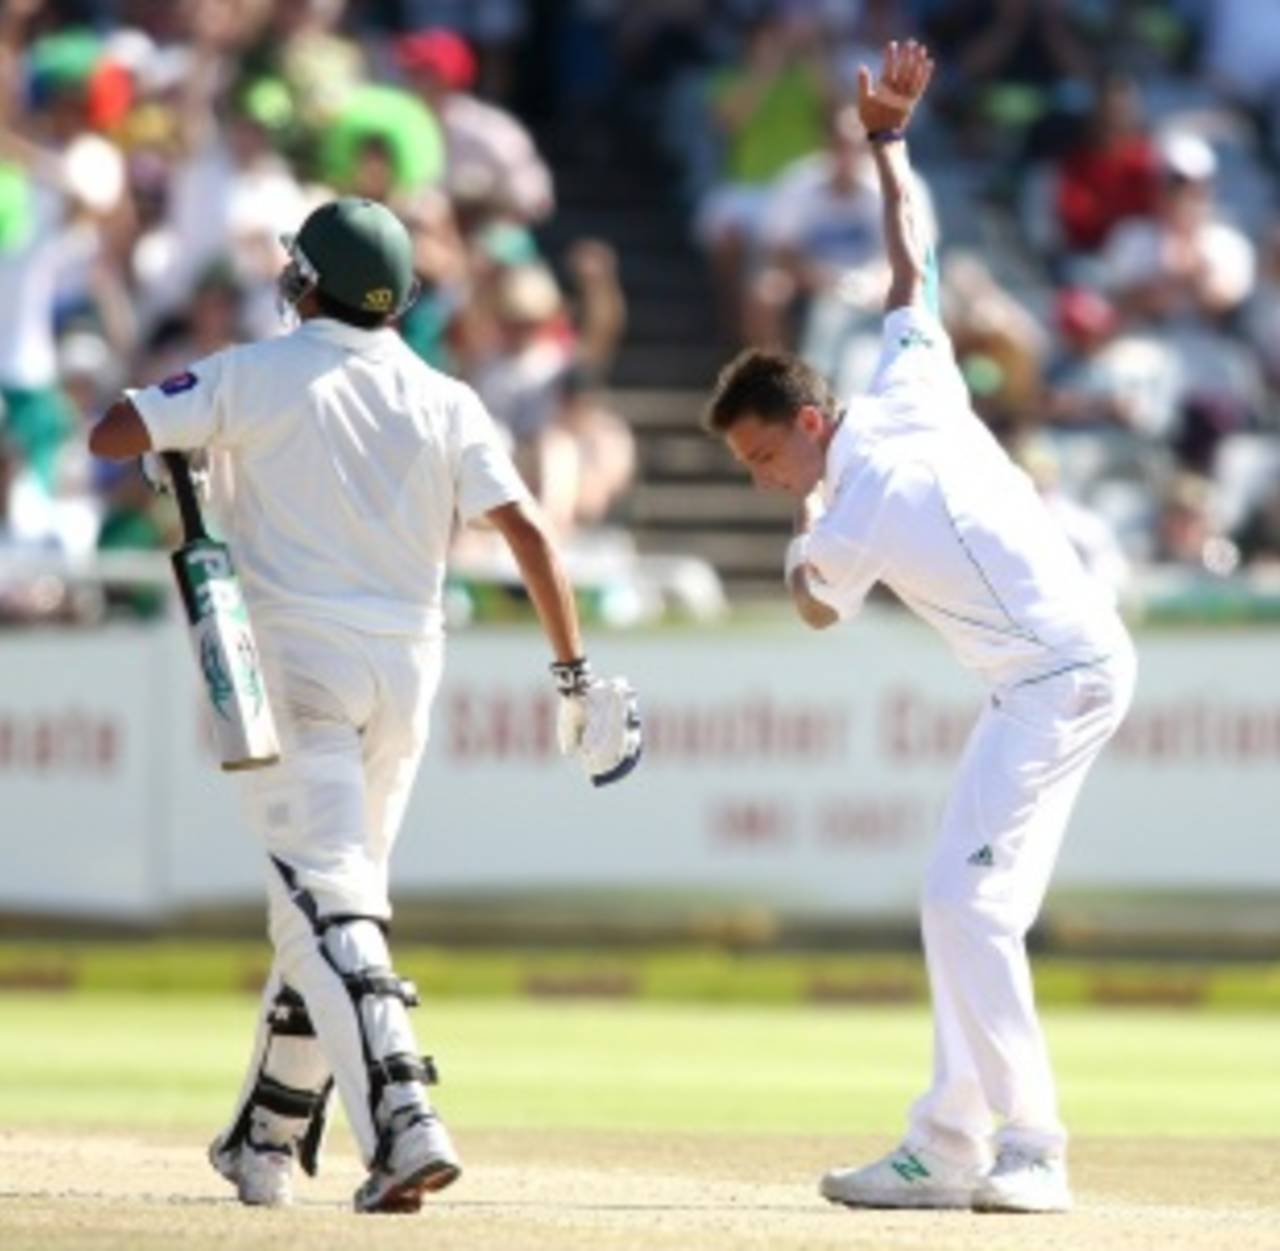 Dale Steyn gestures after dismissing Younis Khan, South Africa v Pakistan, 2nd Test, Cape Town, 3rd day, February 16, 2013